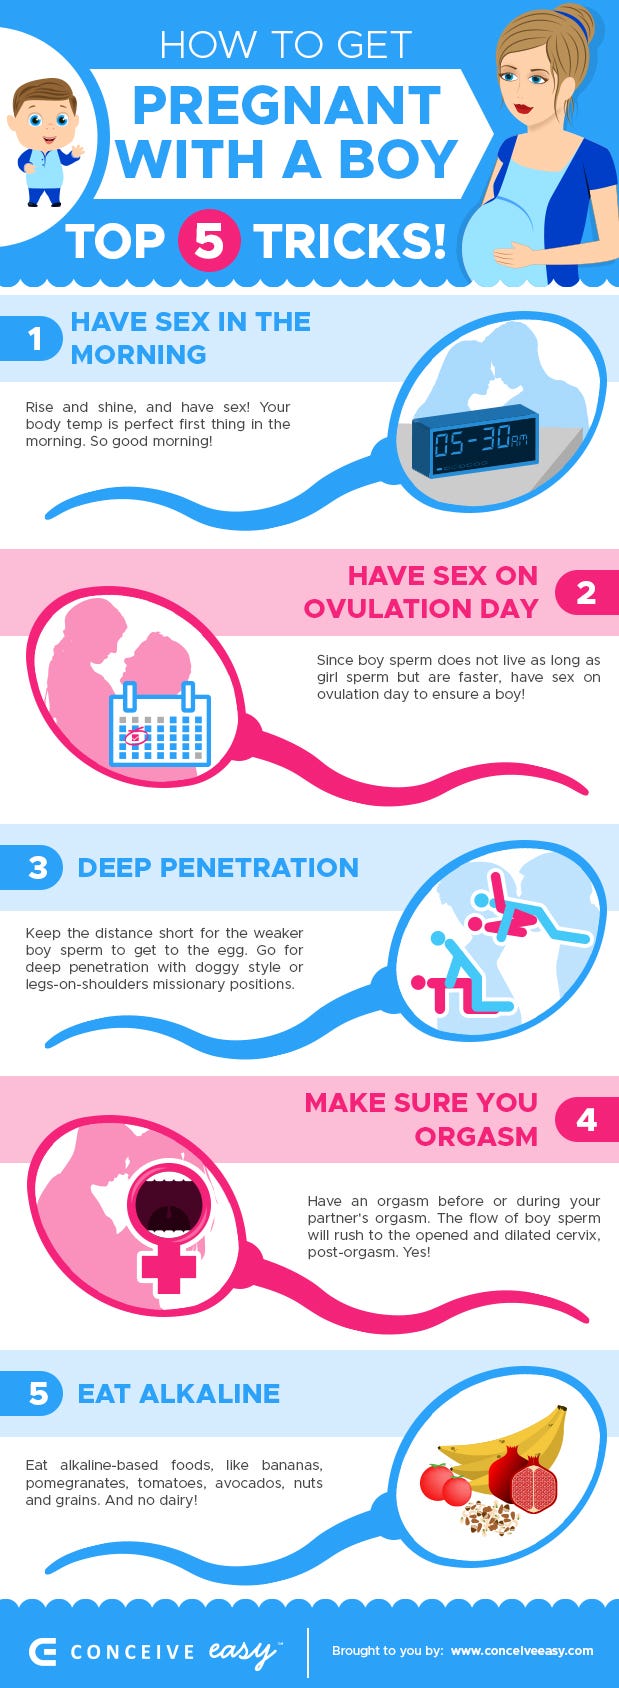 Top 5 Tricks How to Get Pregnant with a Boy Infographic